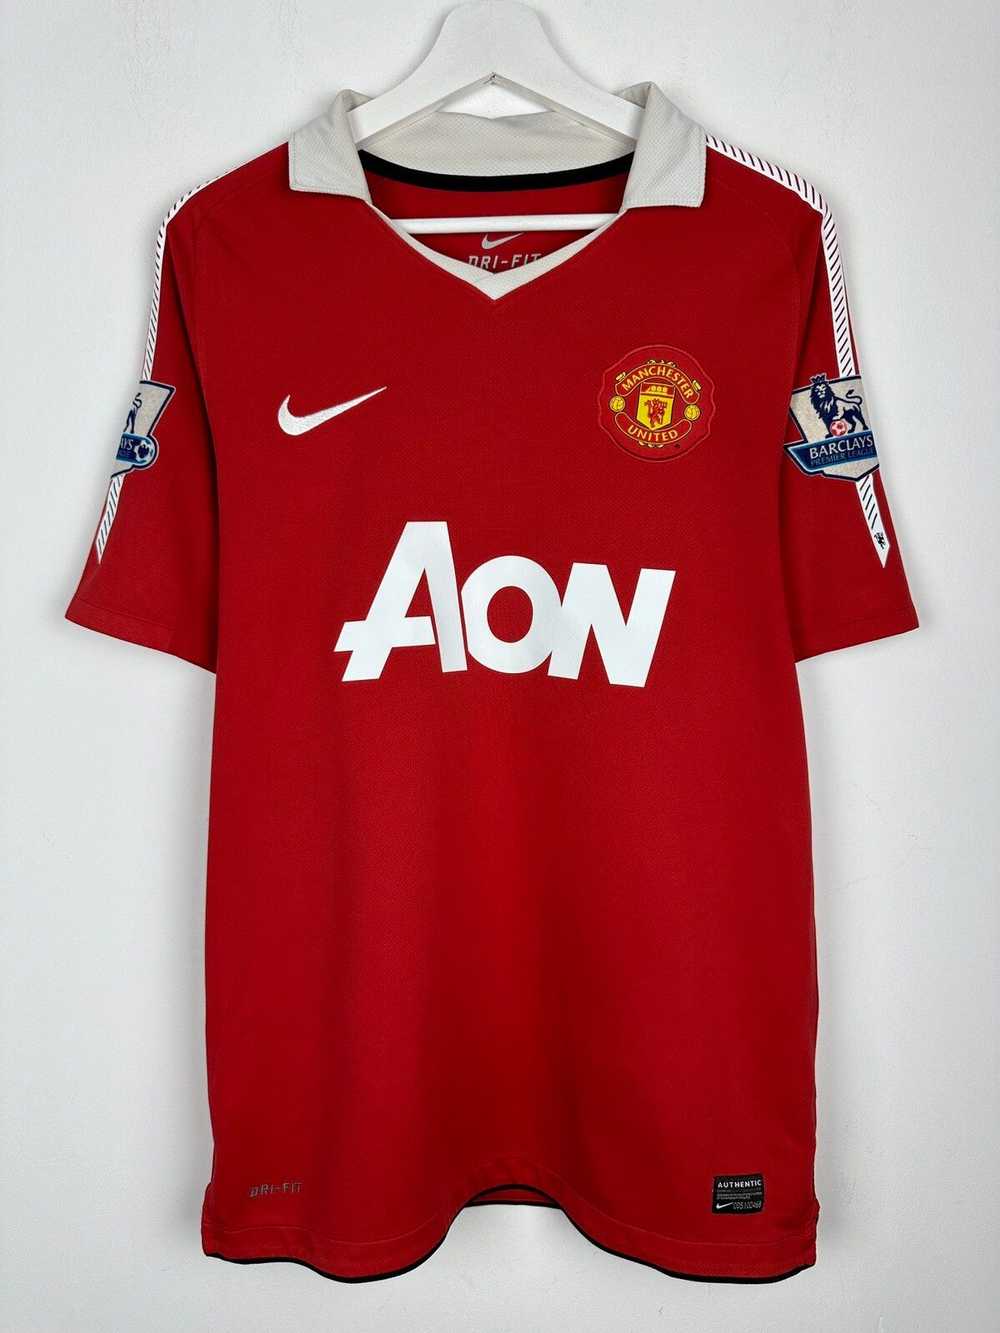 Jersey × Nike × Soccer Jersey #10 Rooney Manchest… - image 4